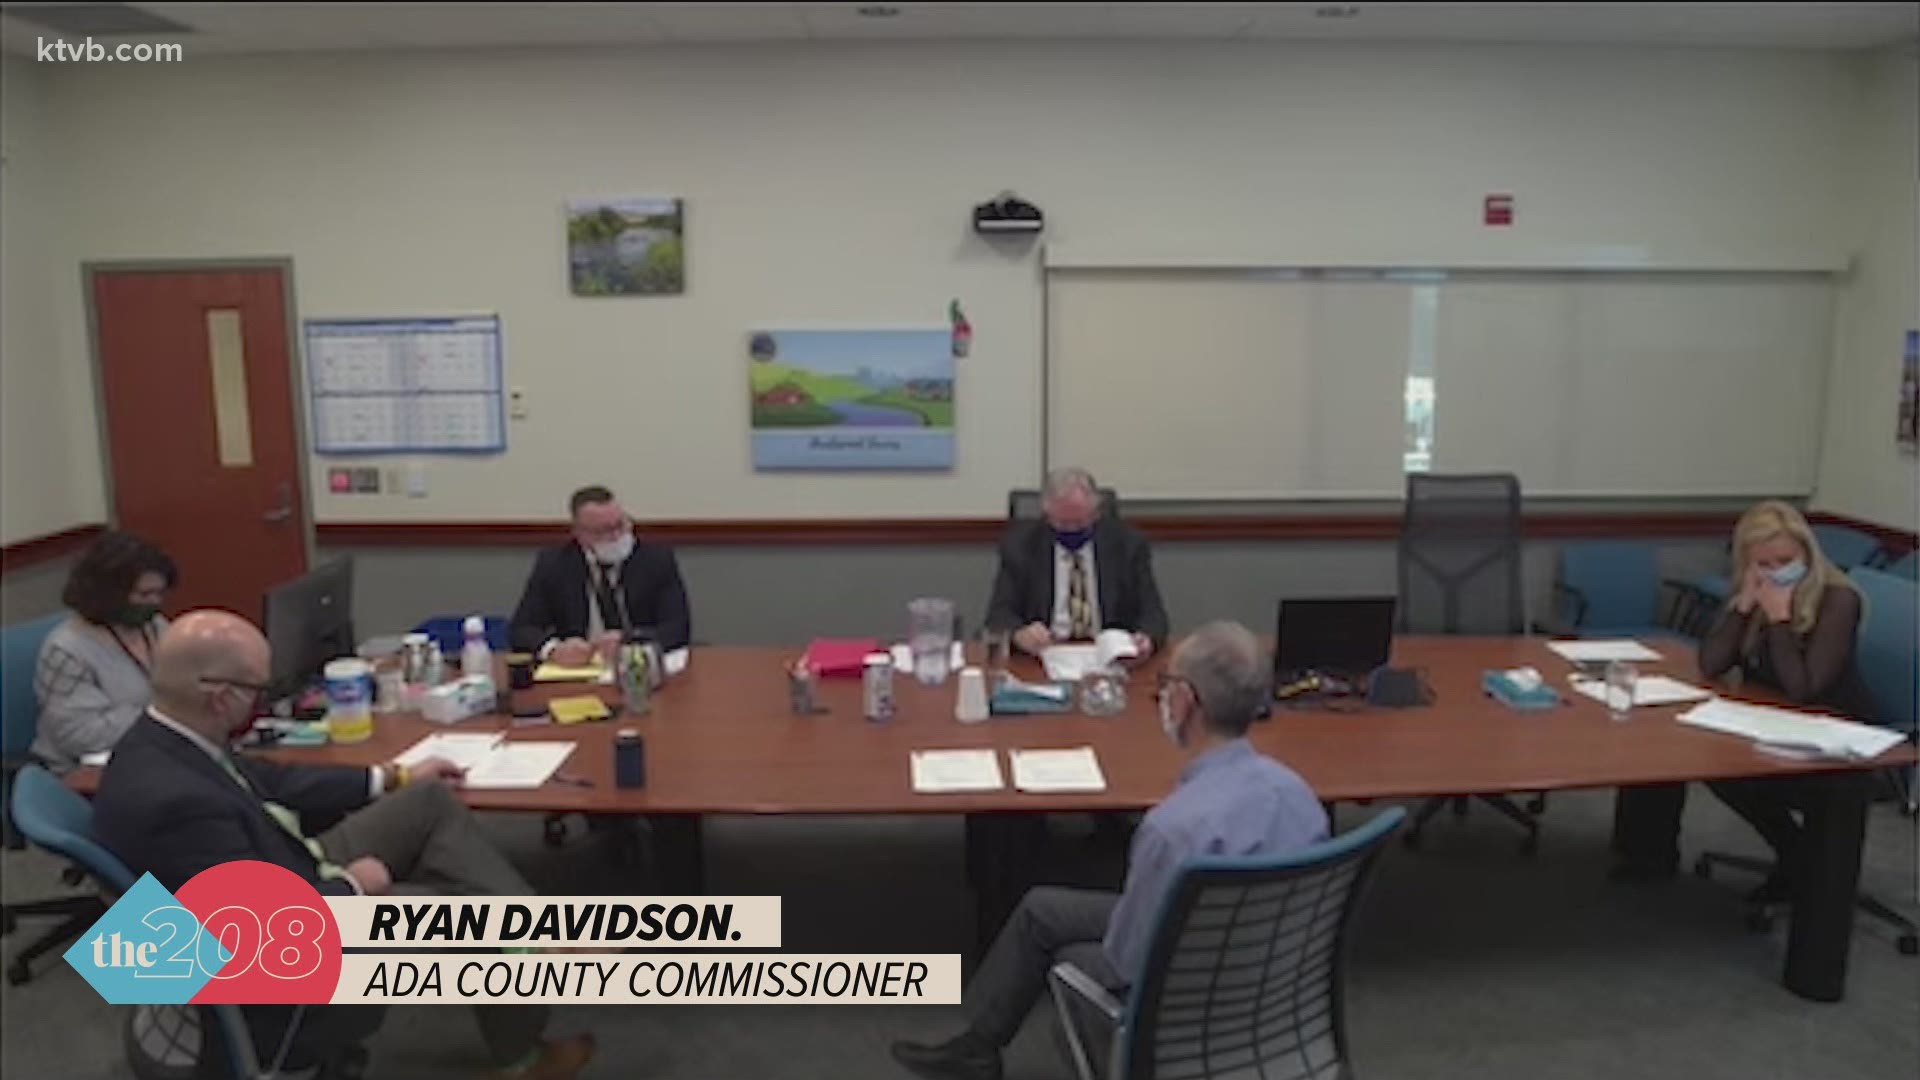 Two of the commissioners voted to keep their recommendation, saying Labrador has the political experience for the position and Dr. Blue is overly qualified.